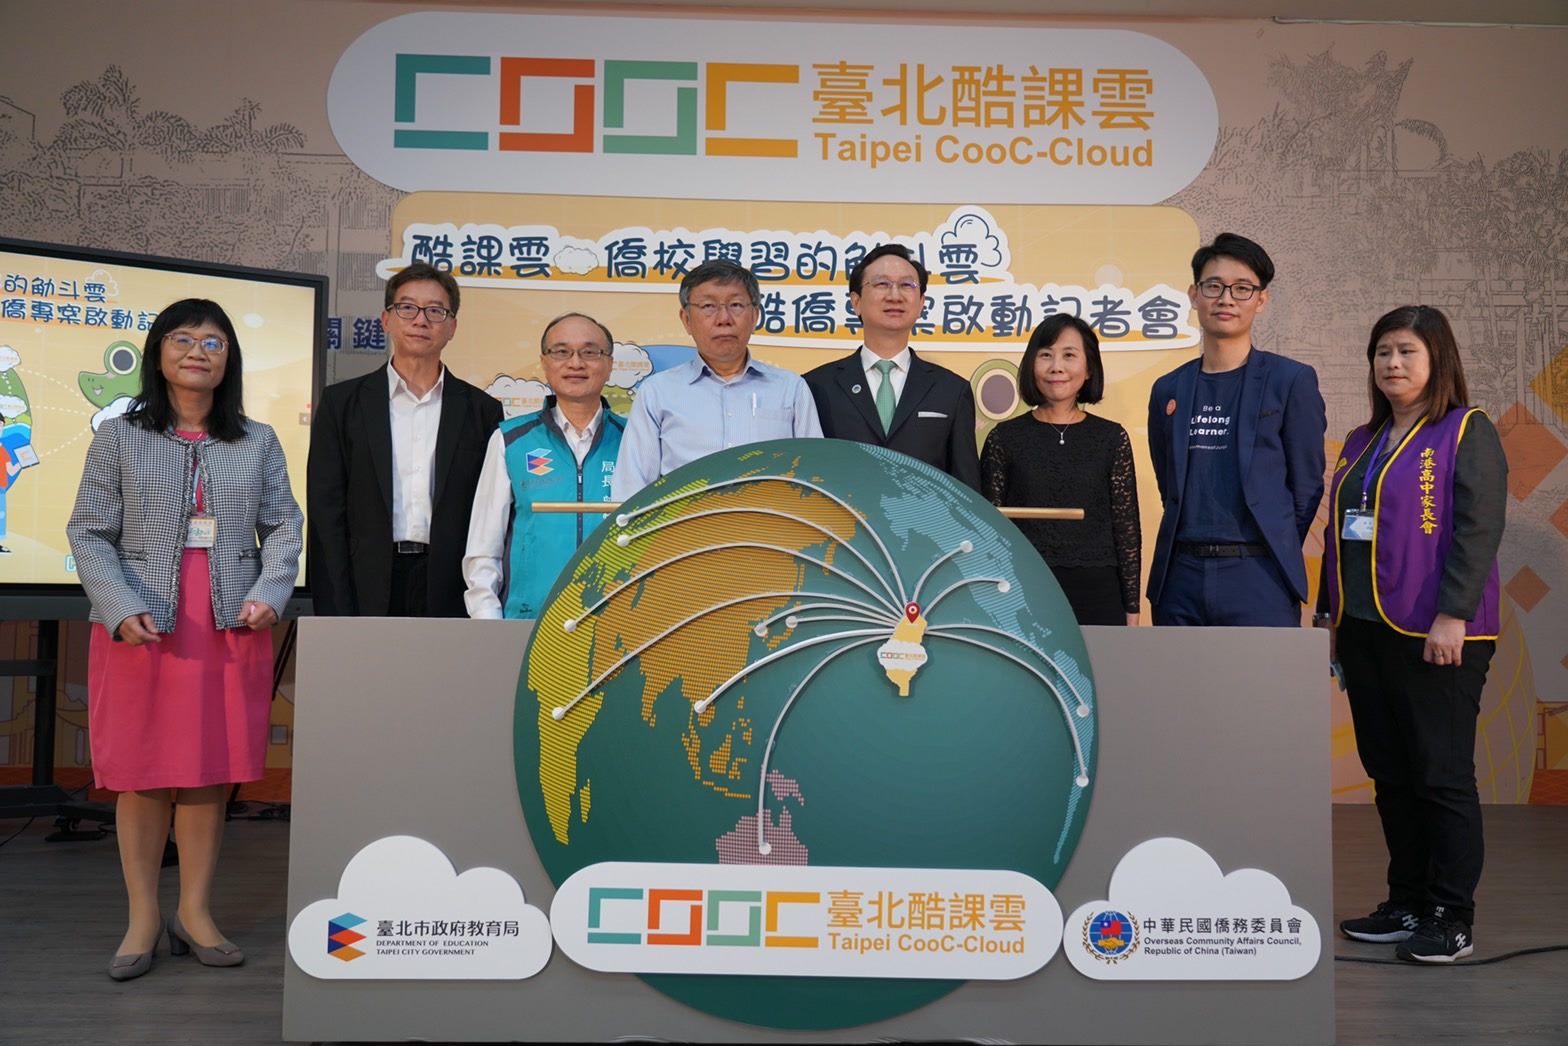 Taipei City CooC Cloud is awarded WITSA Global ICT Excellence-E-Education & Learning Award. (Photo / Provided by the Department of Education, Taipei City Government)